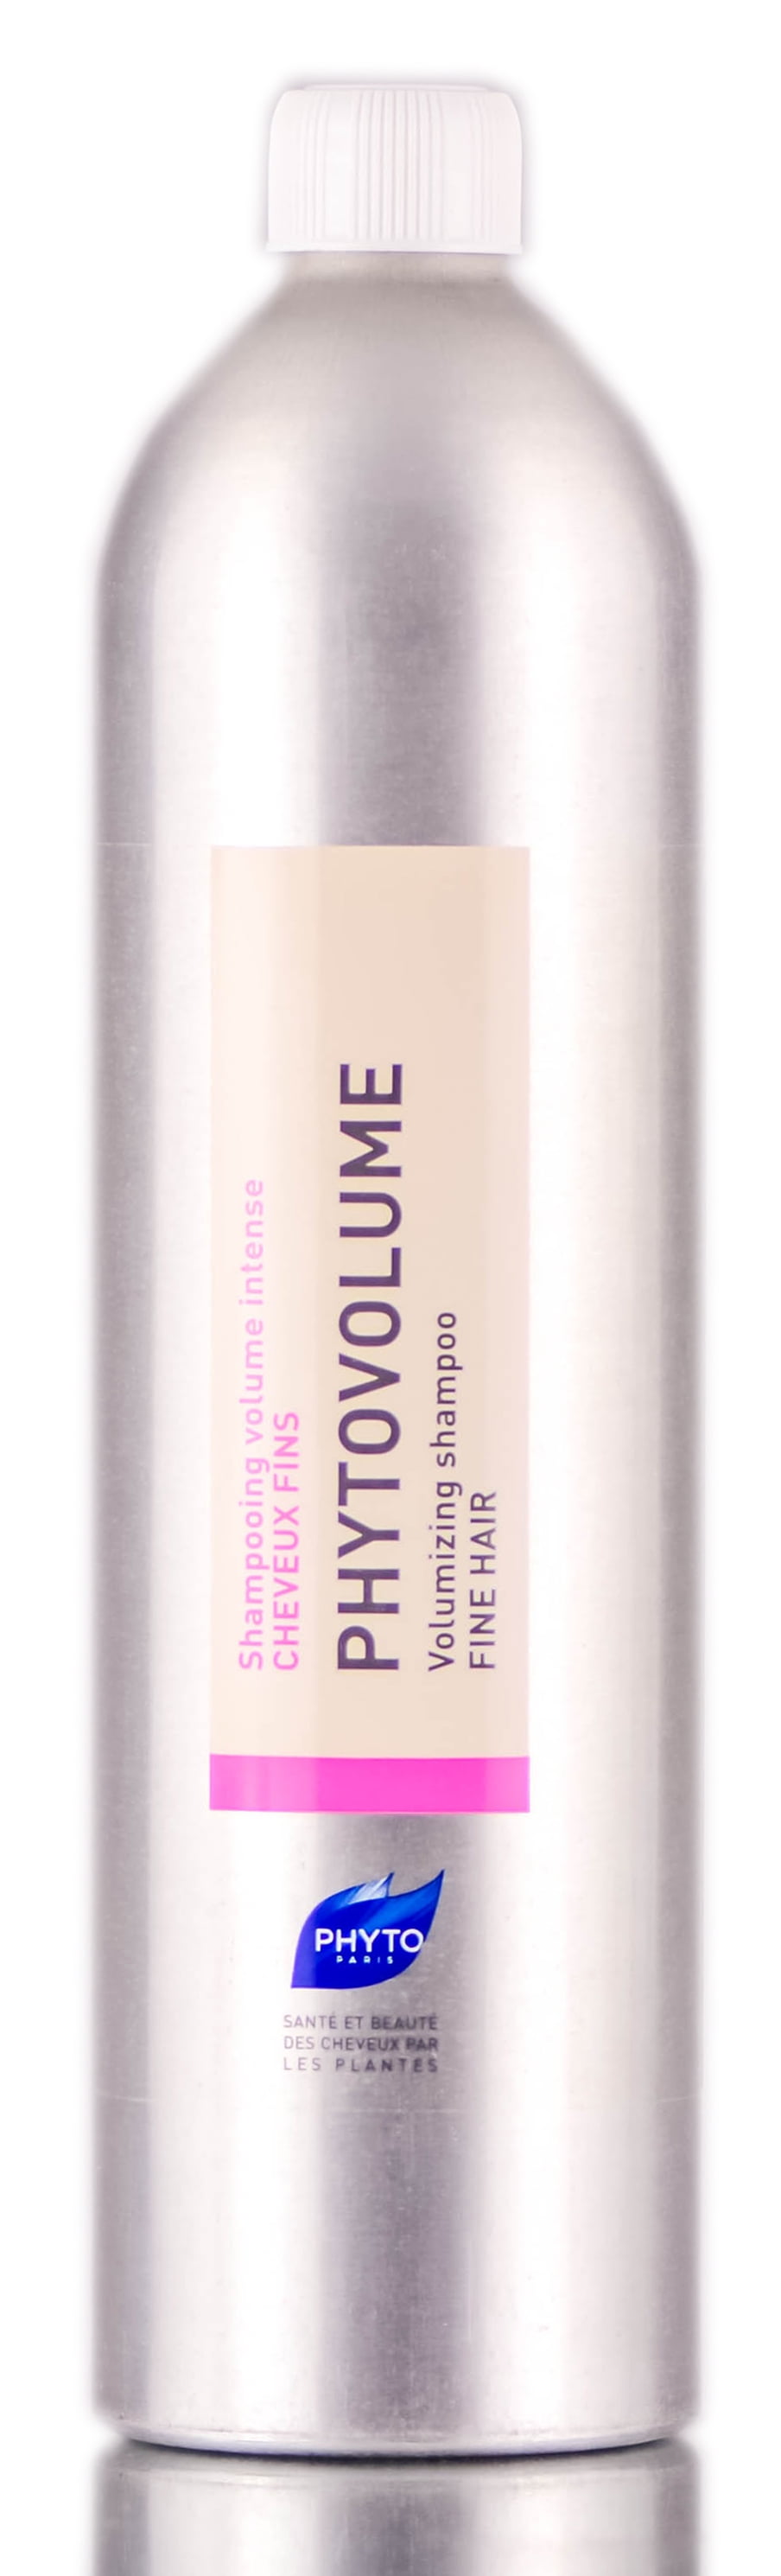 Phyto Phytovolume Volumizing with Yarrow Fine and Limp Hair - oz / liter - Pack of 6 with Sleek Comb Walmart.com